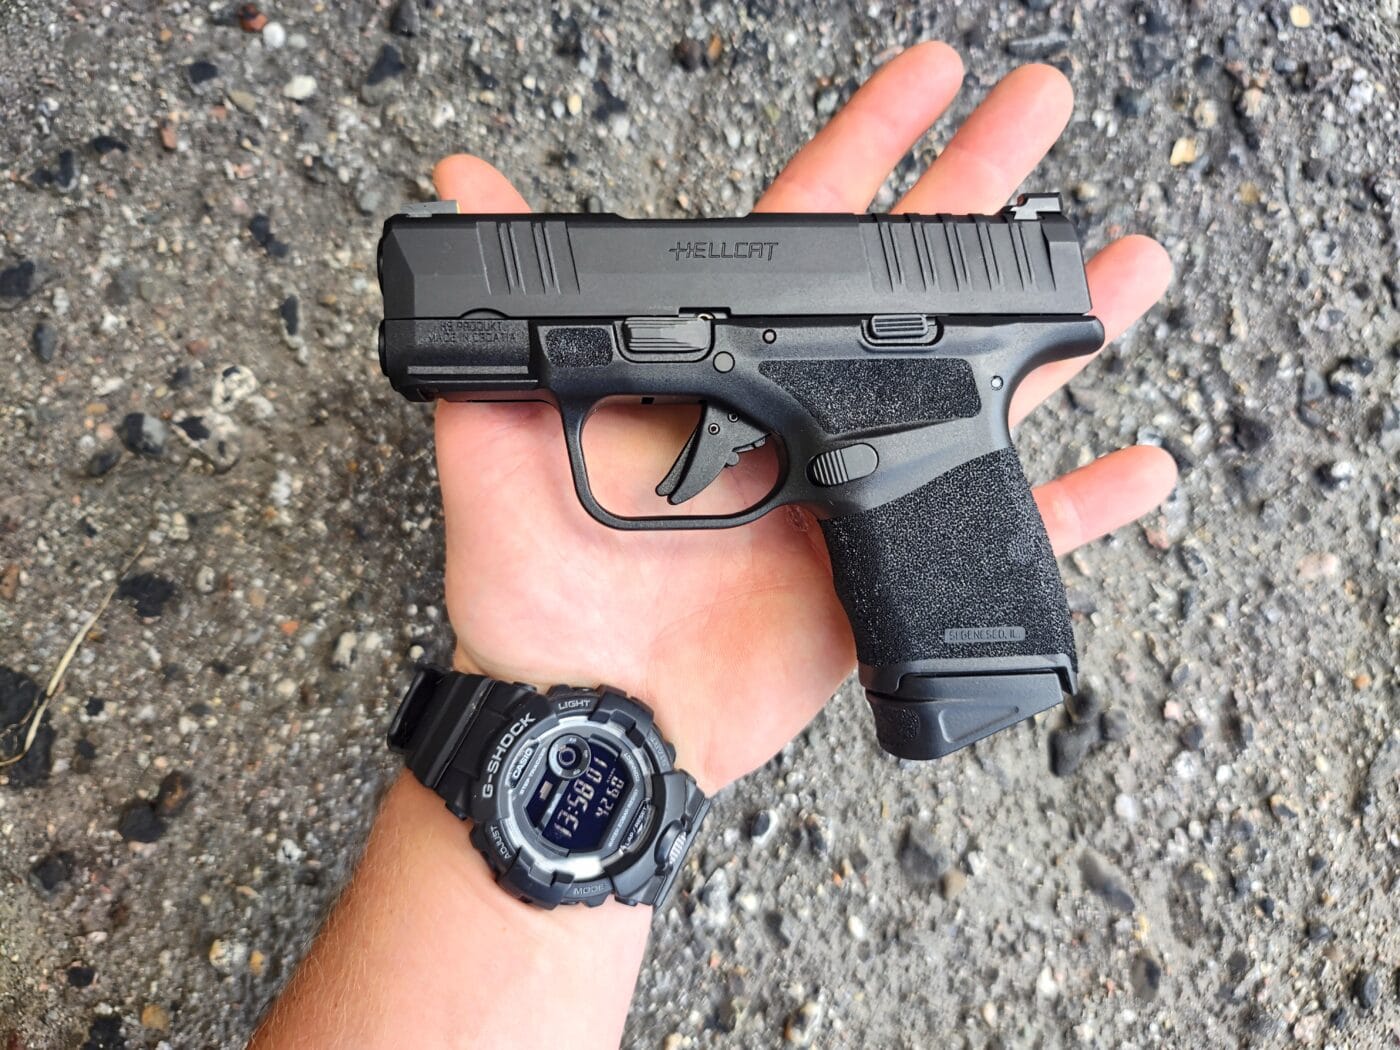 Springfield Hellcat sitting in the palm of a person's hand